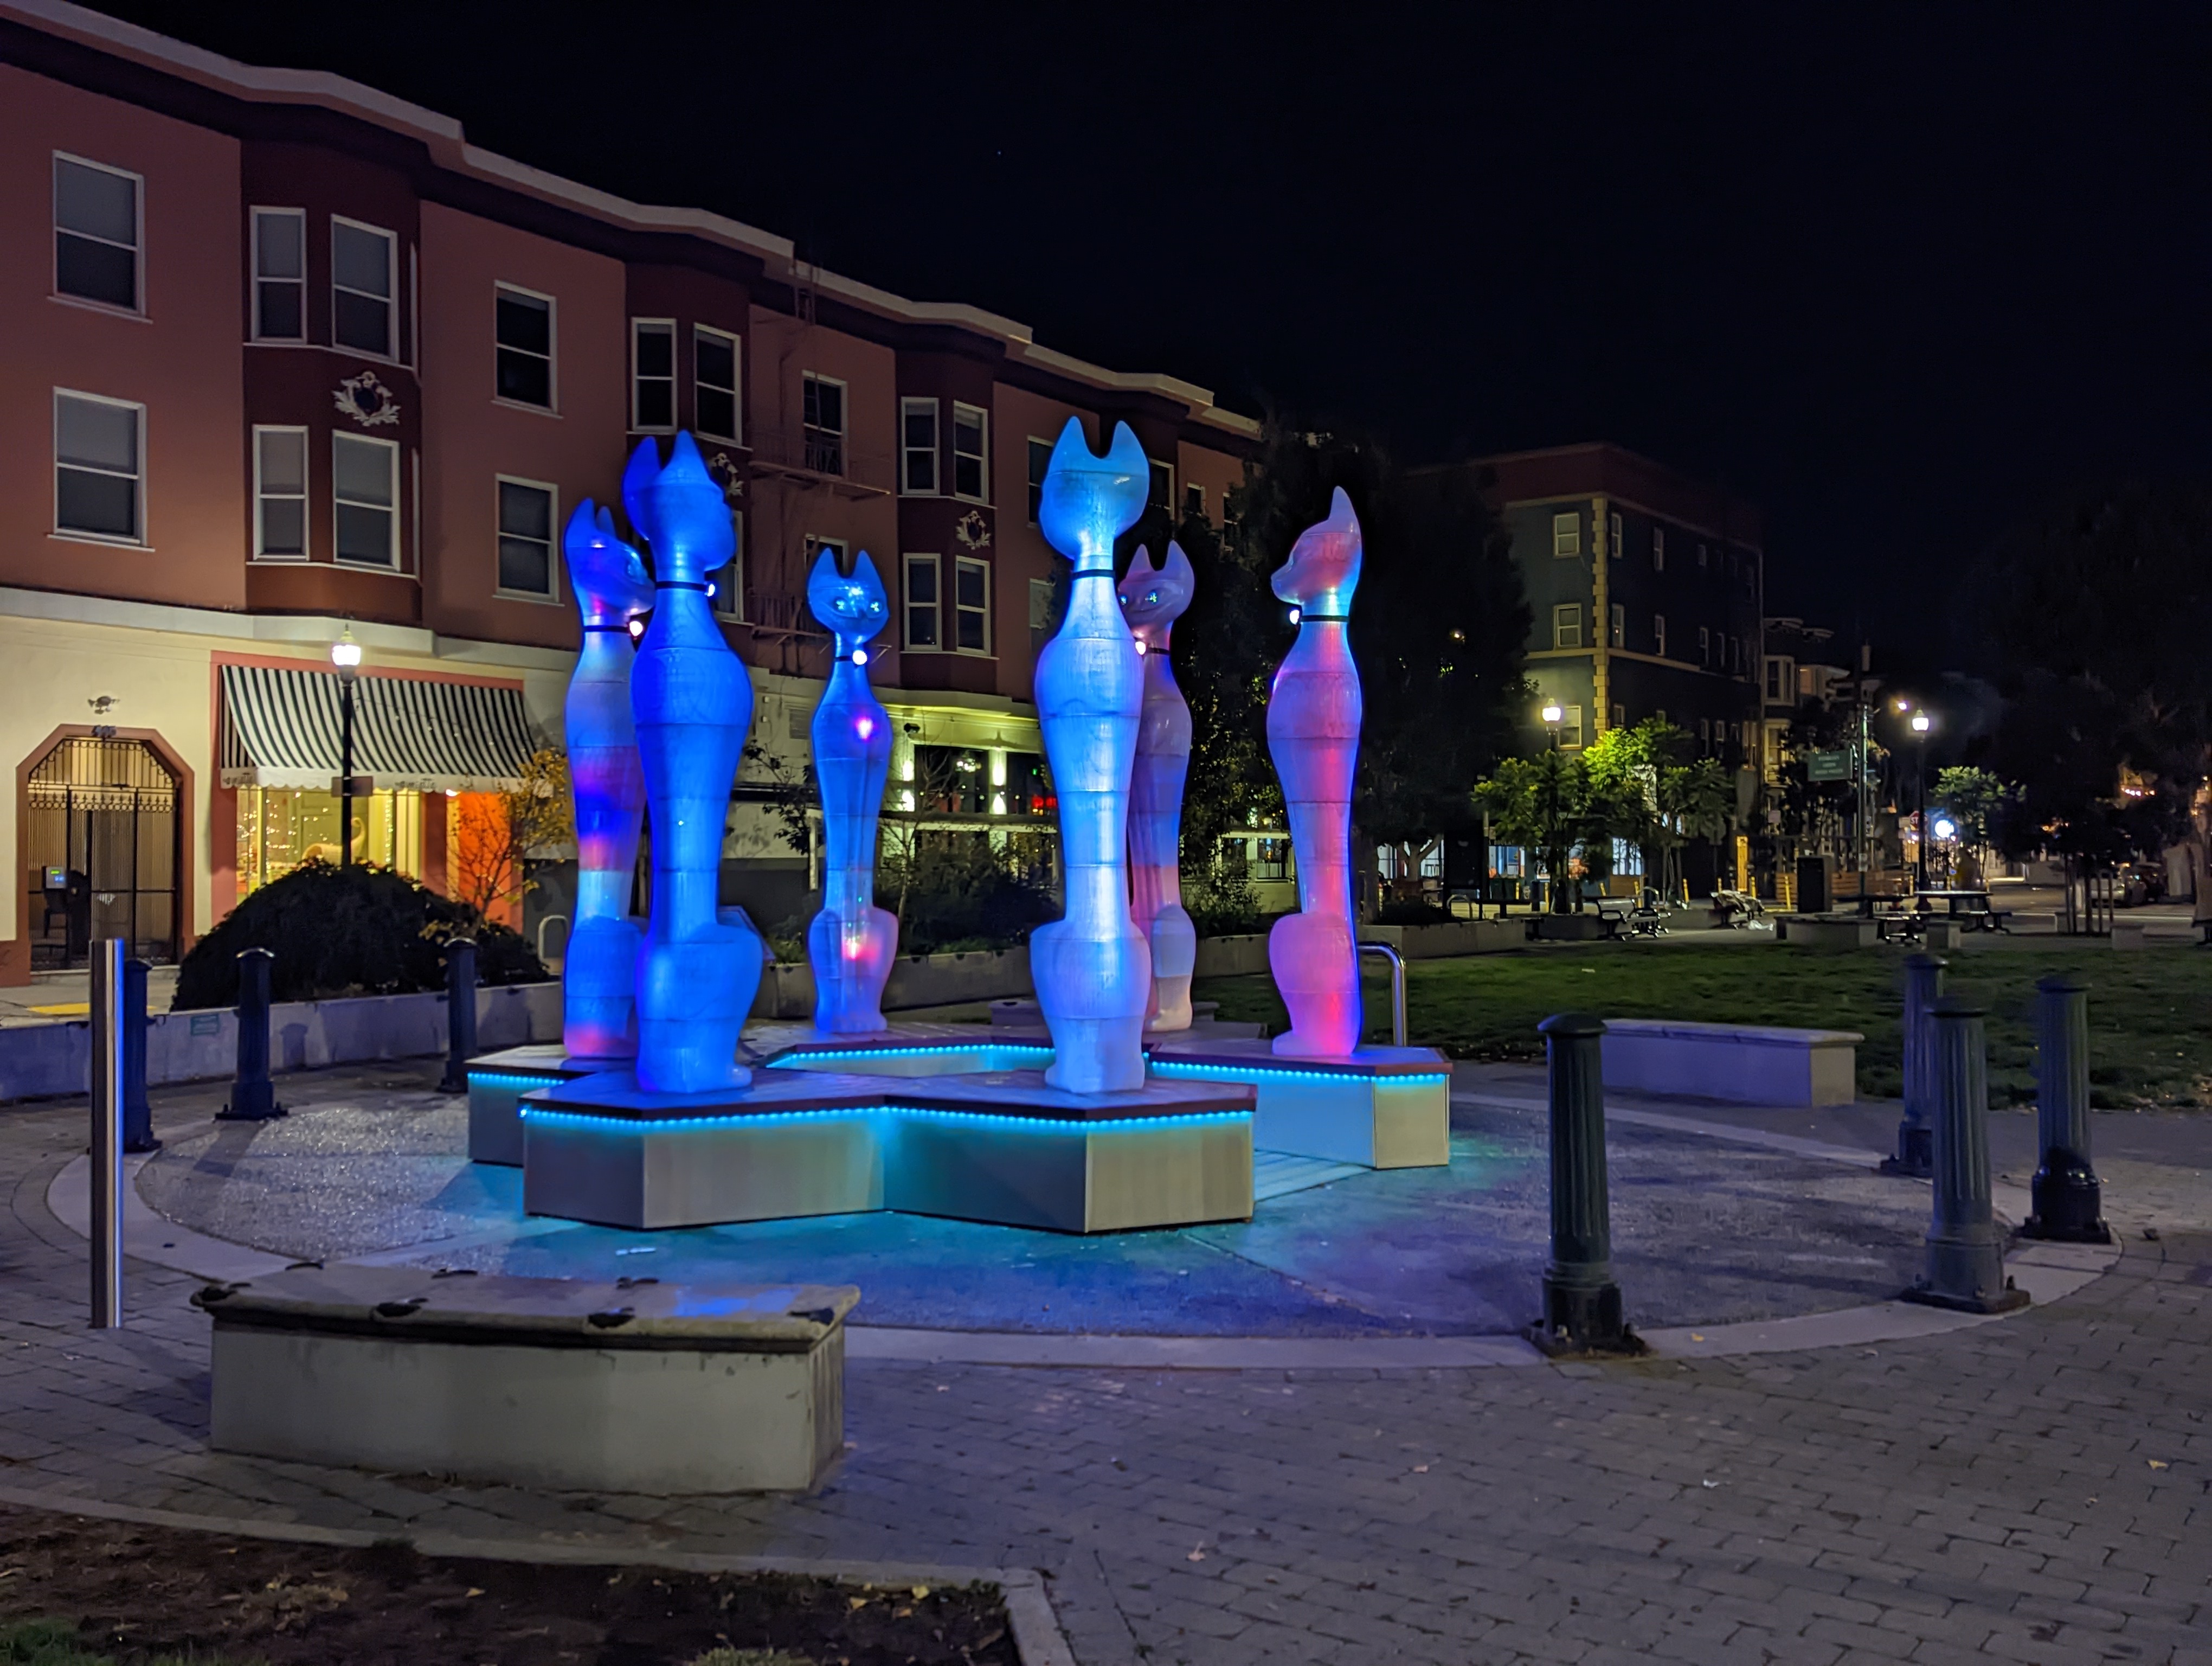 Image of six catoliths lit up at night by David Normal